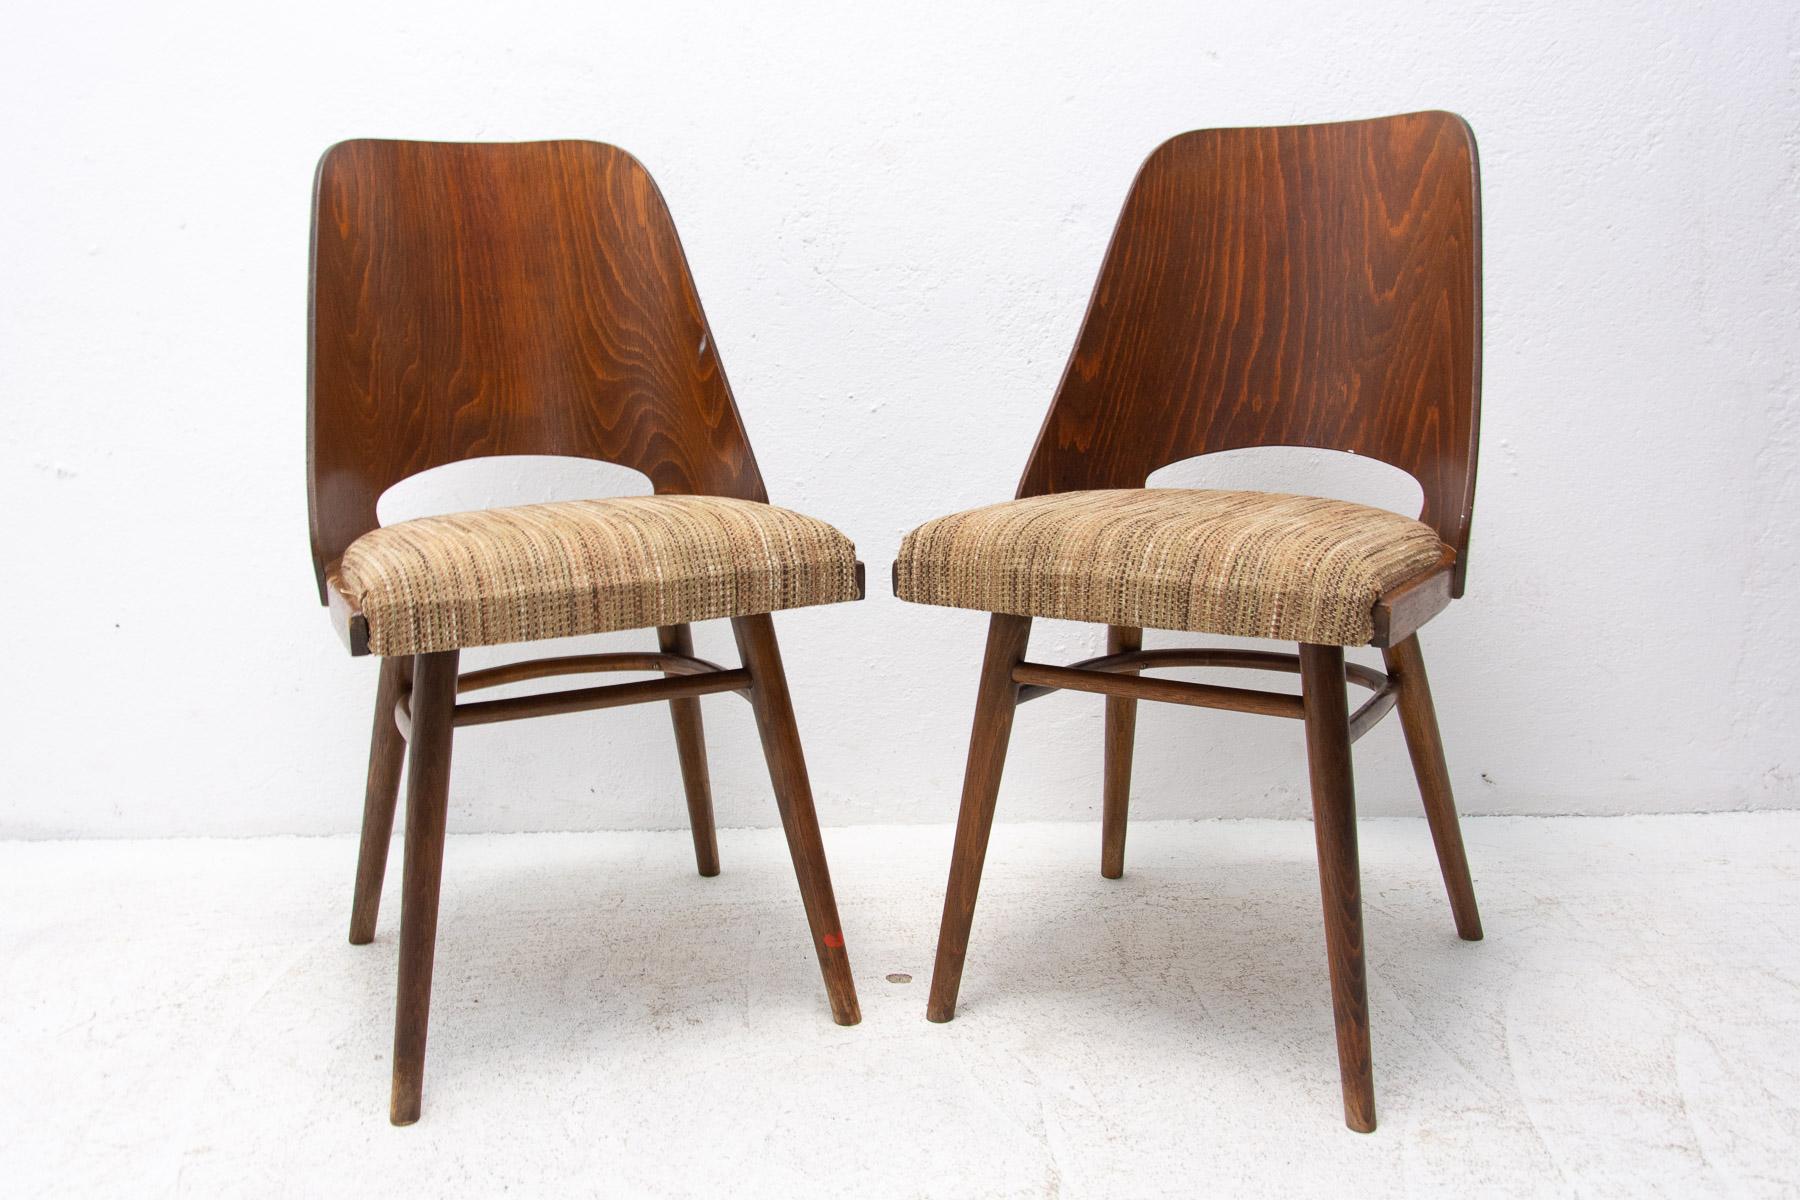 Interesting model of vintage bentwood dining chairs designed by Radomír Hofman for TON Bystrice pod Hostýnem (Thonet successor in Czechoslovakia after World War 2) . They were made in the former Czechoslovakia in the 1960´s. The chairs are made of